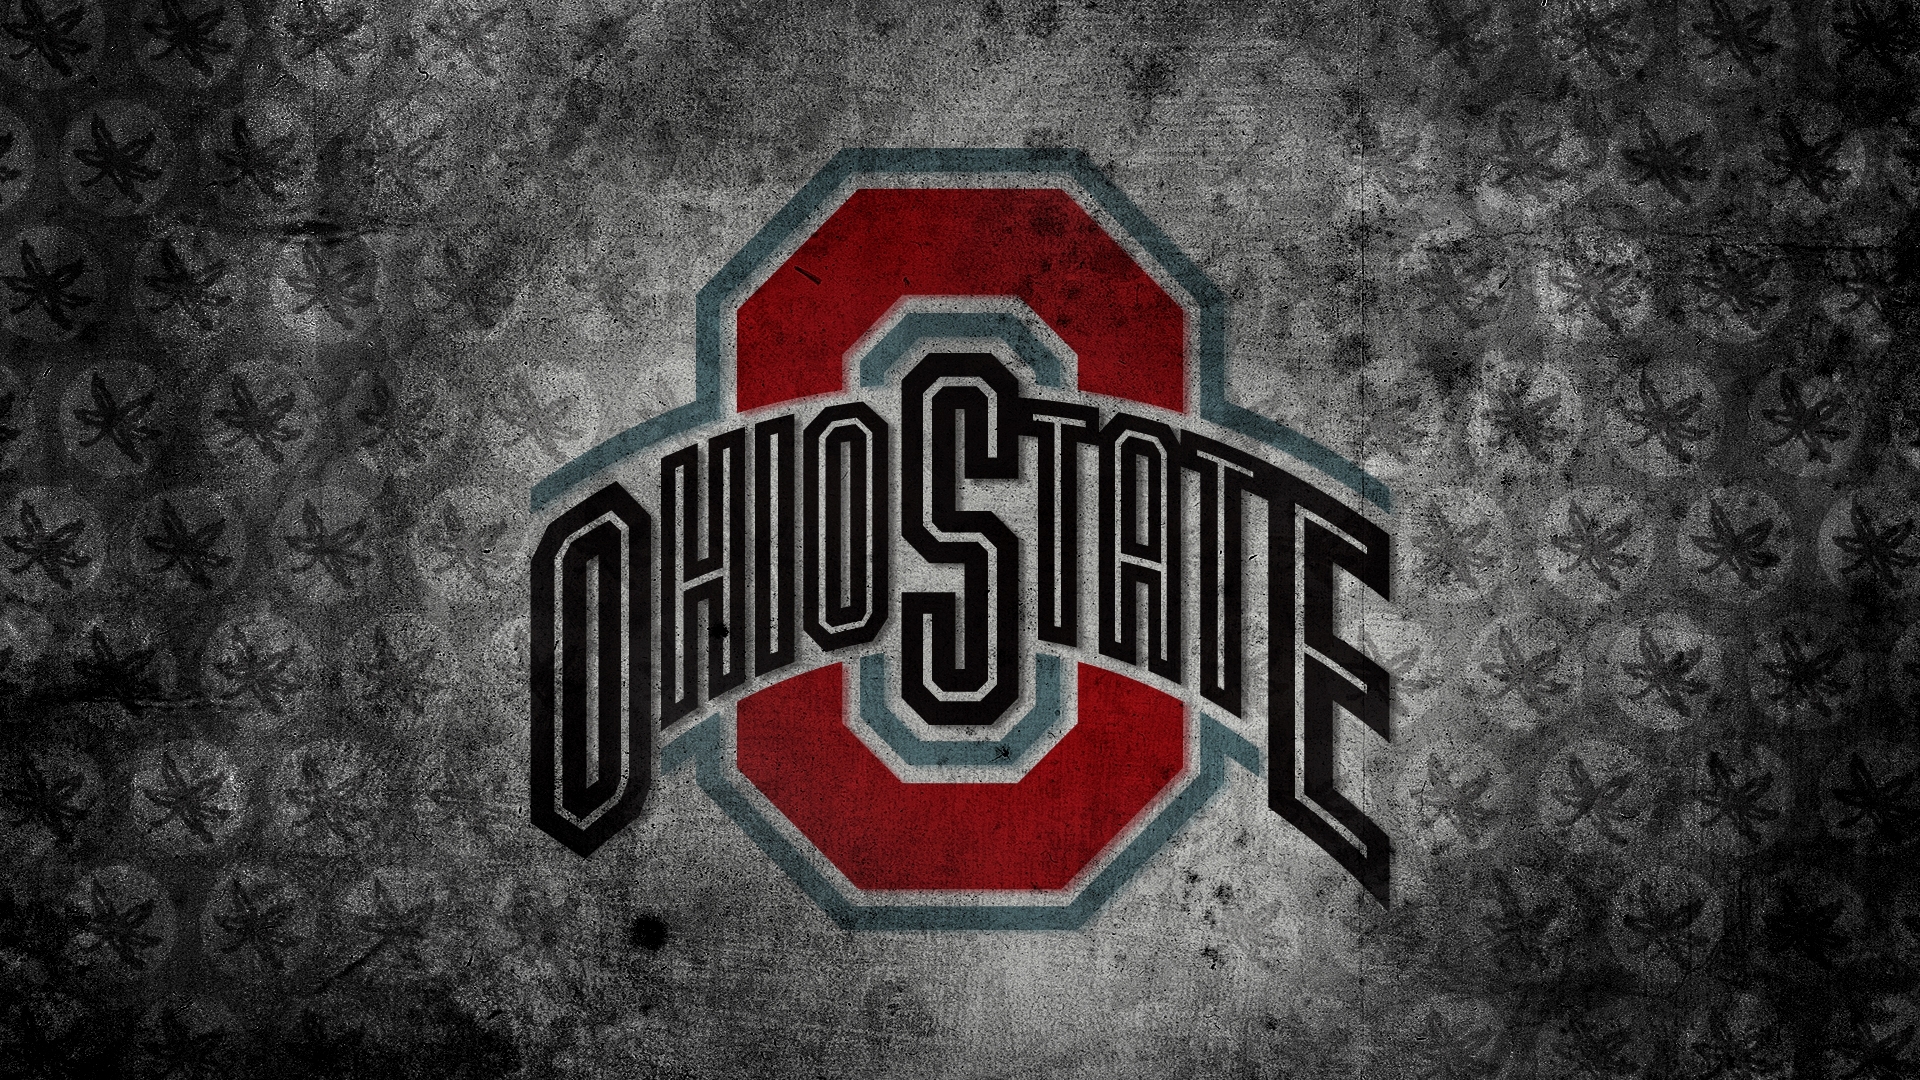 10 Best Ohio State Football Logo Wallpaper FULL HD 1080p For PC Background